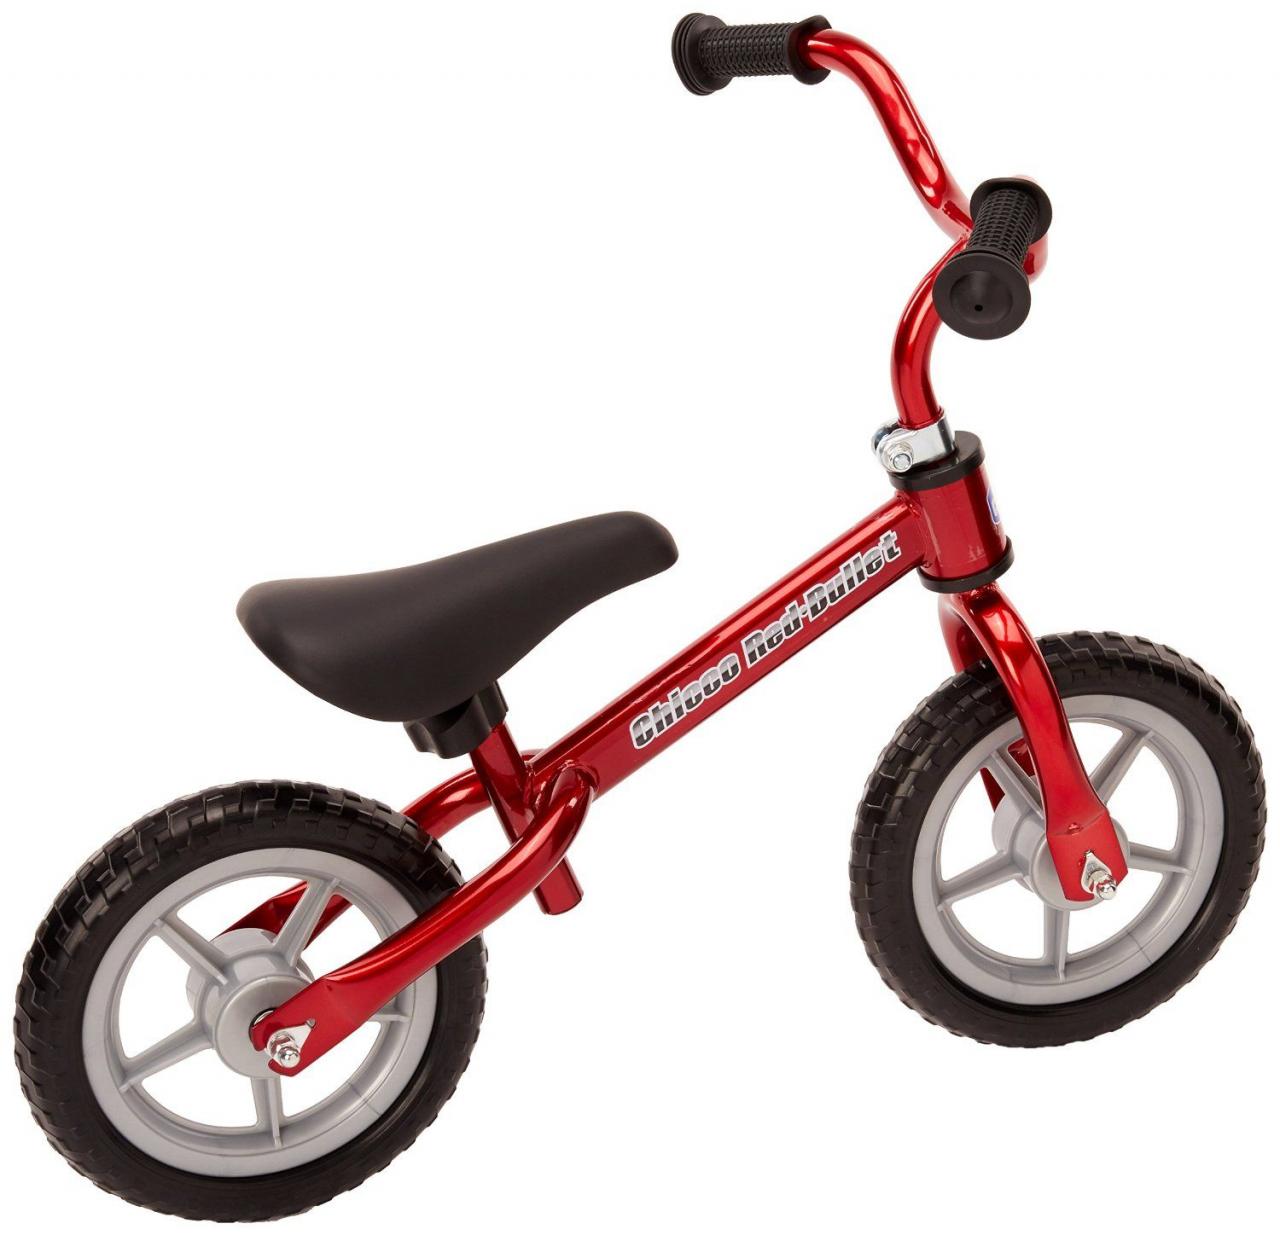 Chicco Red Bullet #Balance Training #Bike is an excellent first #bicycle  for children. #kids | Bicicleta sin pedales, Bicicletas, Motos geniales